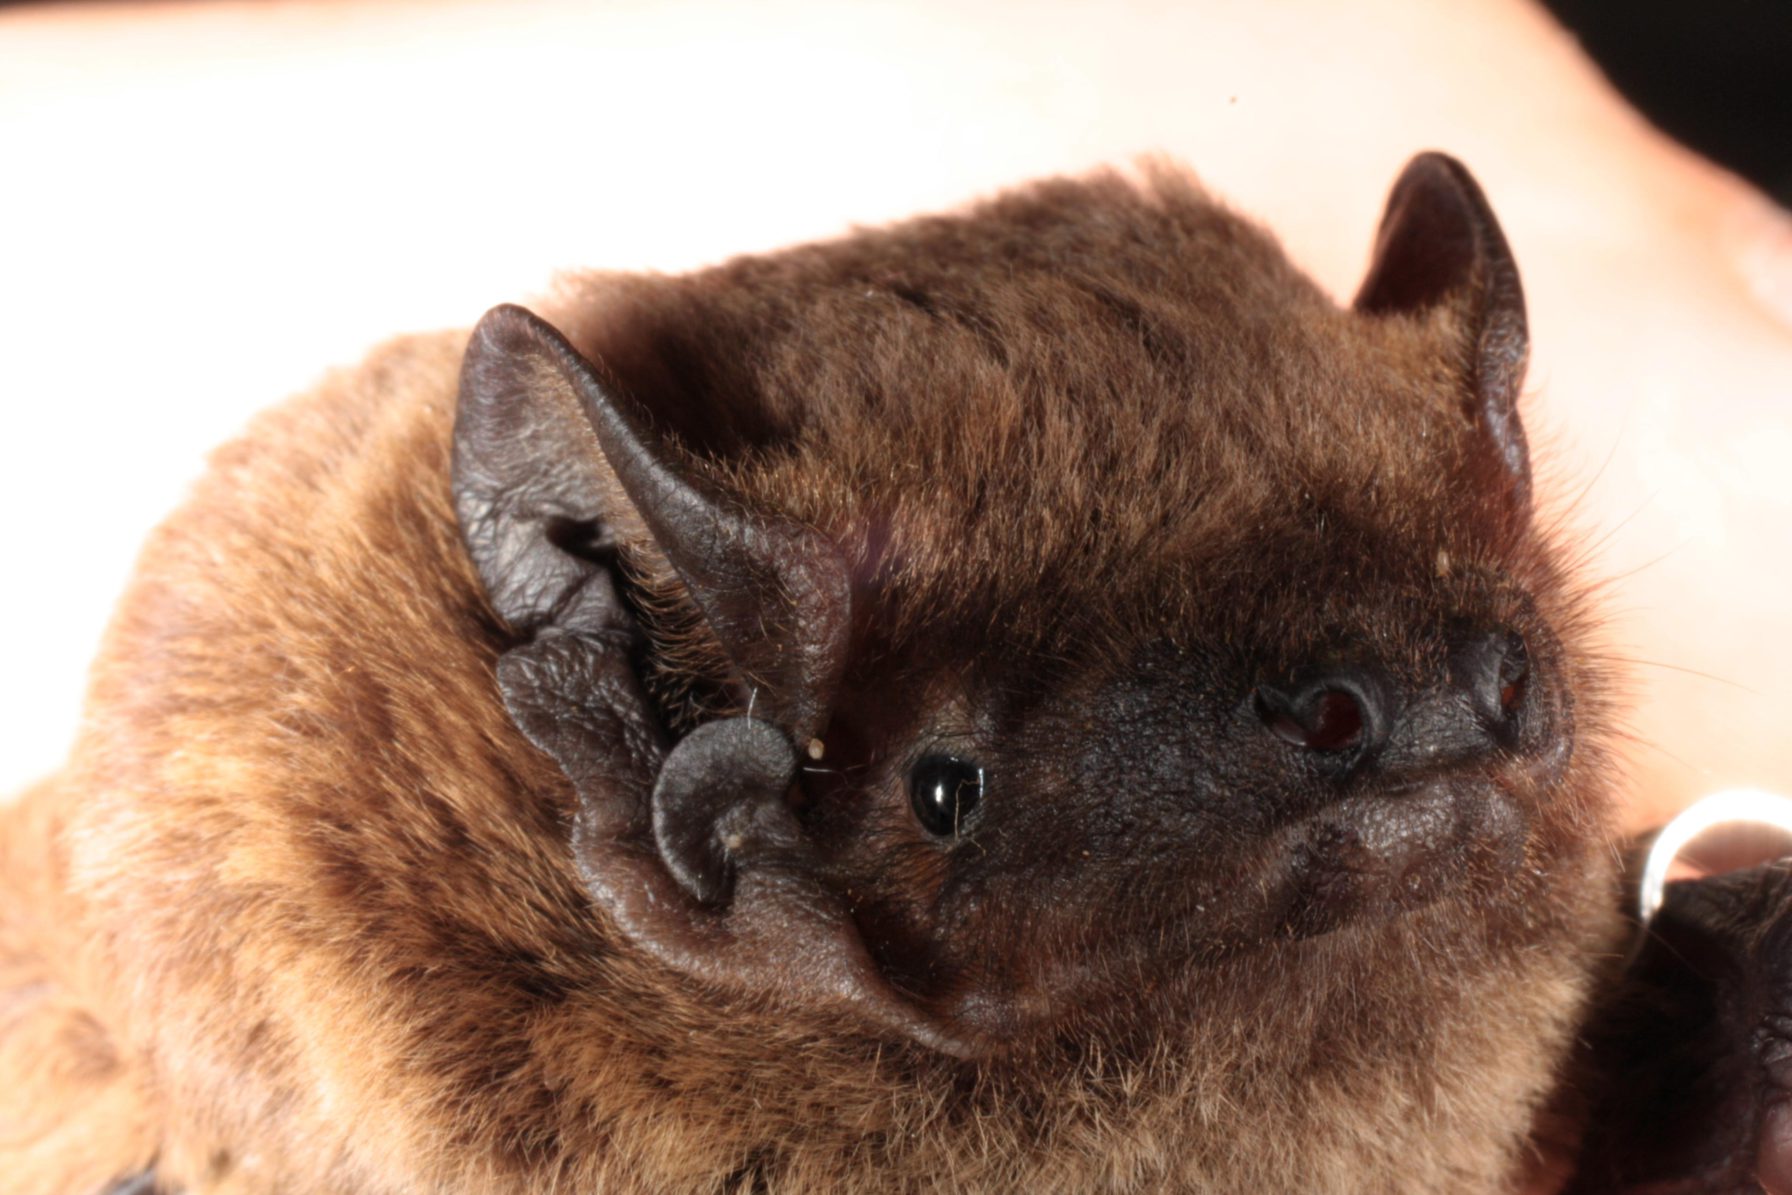 FACTS ABOUT BATS AND COVID-19